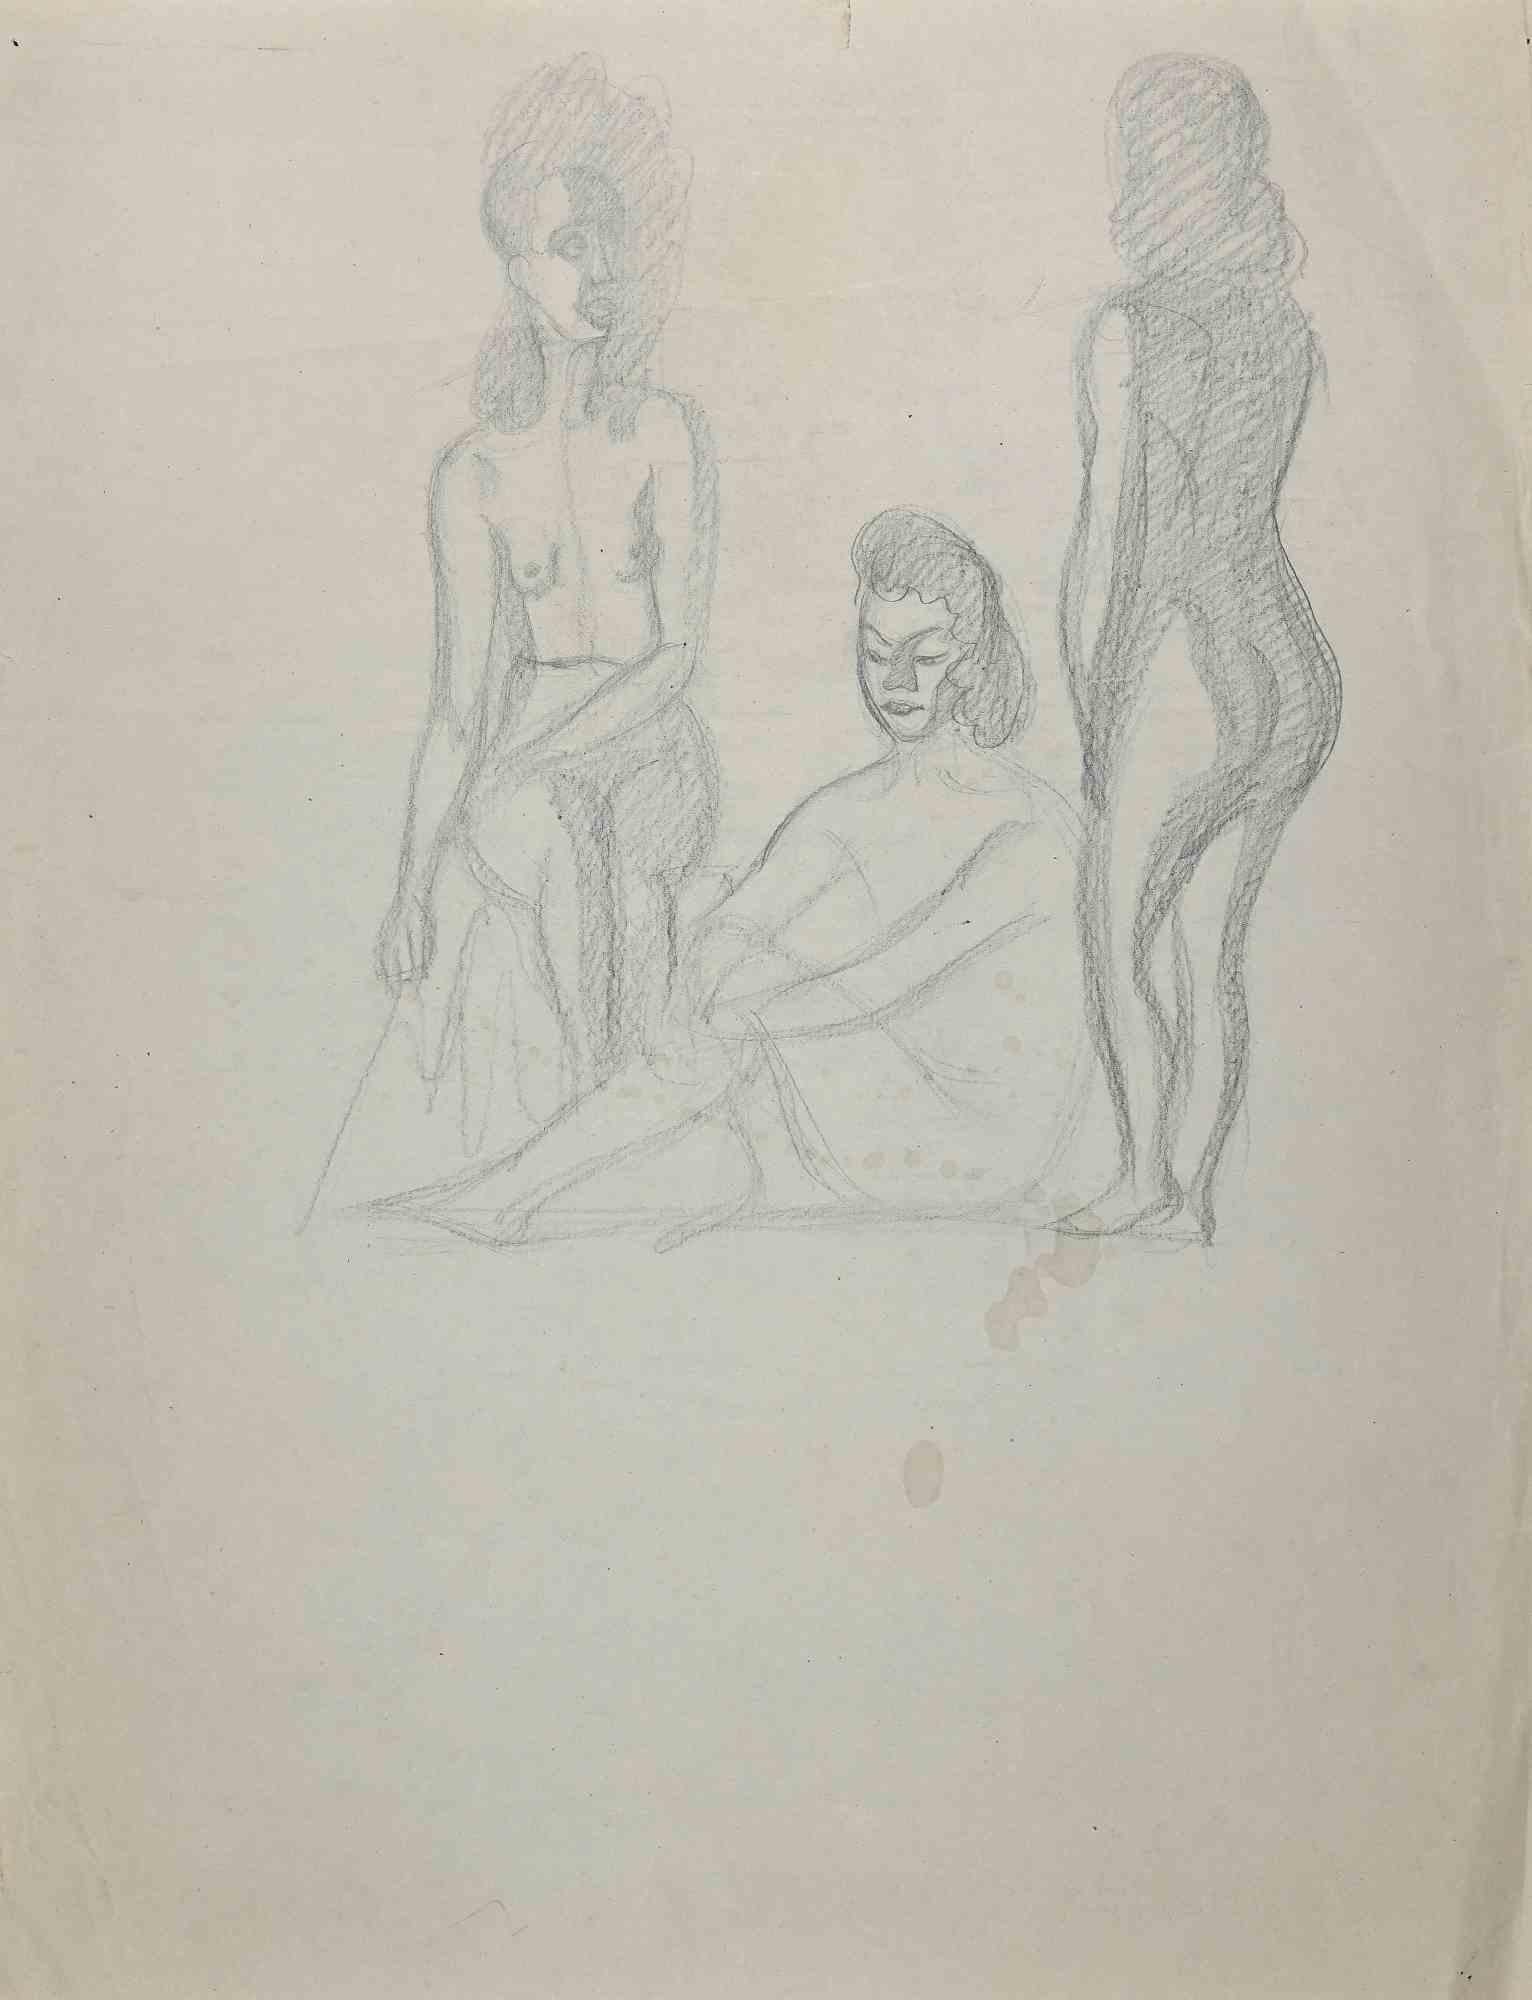 Nude is an original drawing in Pencil, realized in the Mid-20th Century by  Jean Delpech   (1916-1988). 

Good conditions.

Jean-Raymond Delpech (1988-1916) is a French painter, engraver and illustrator, who is most influenced by the country of his